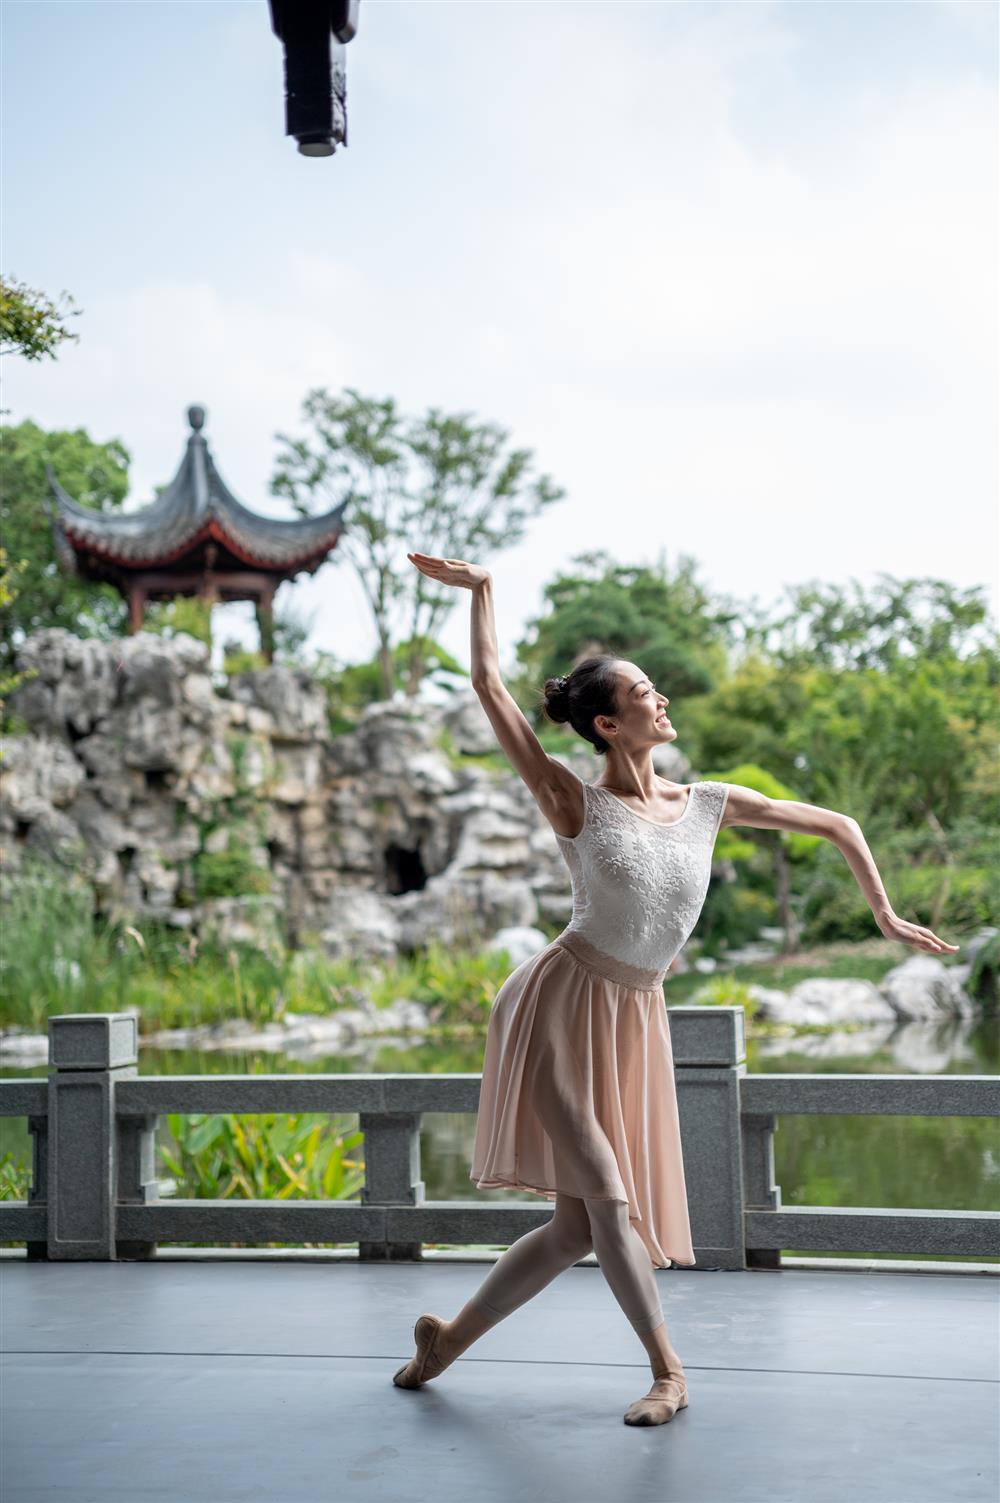 The original dance drama "Nine Years of Yonghe" unveils a corner of the veil between the pavilions and towers in Shenyuan, waving hair on the fan and dancing in the garden. Dance Drama | Nine Years of Yonghe